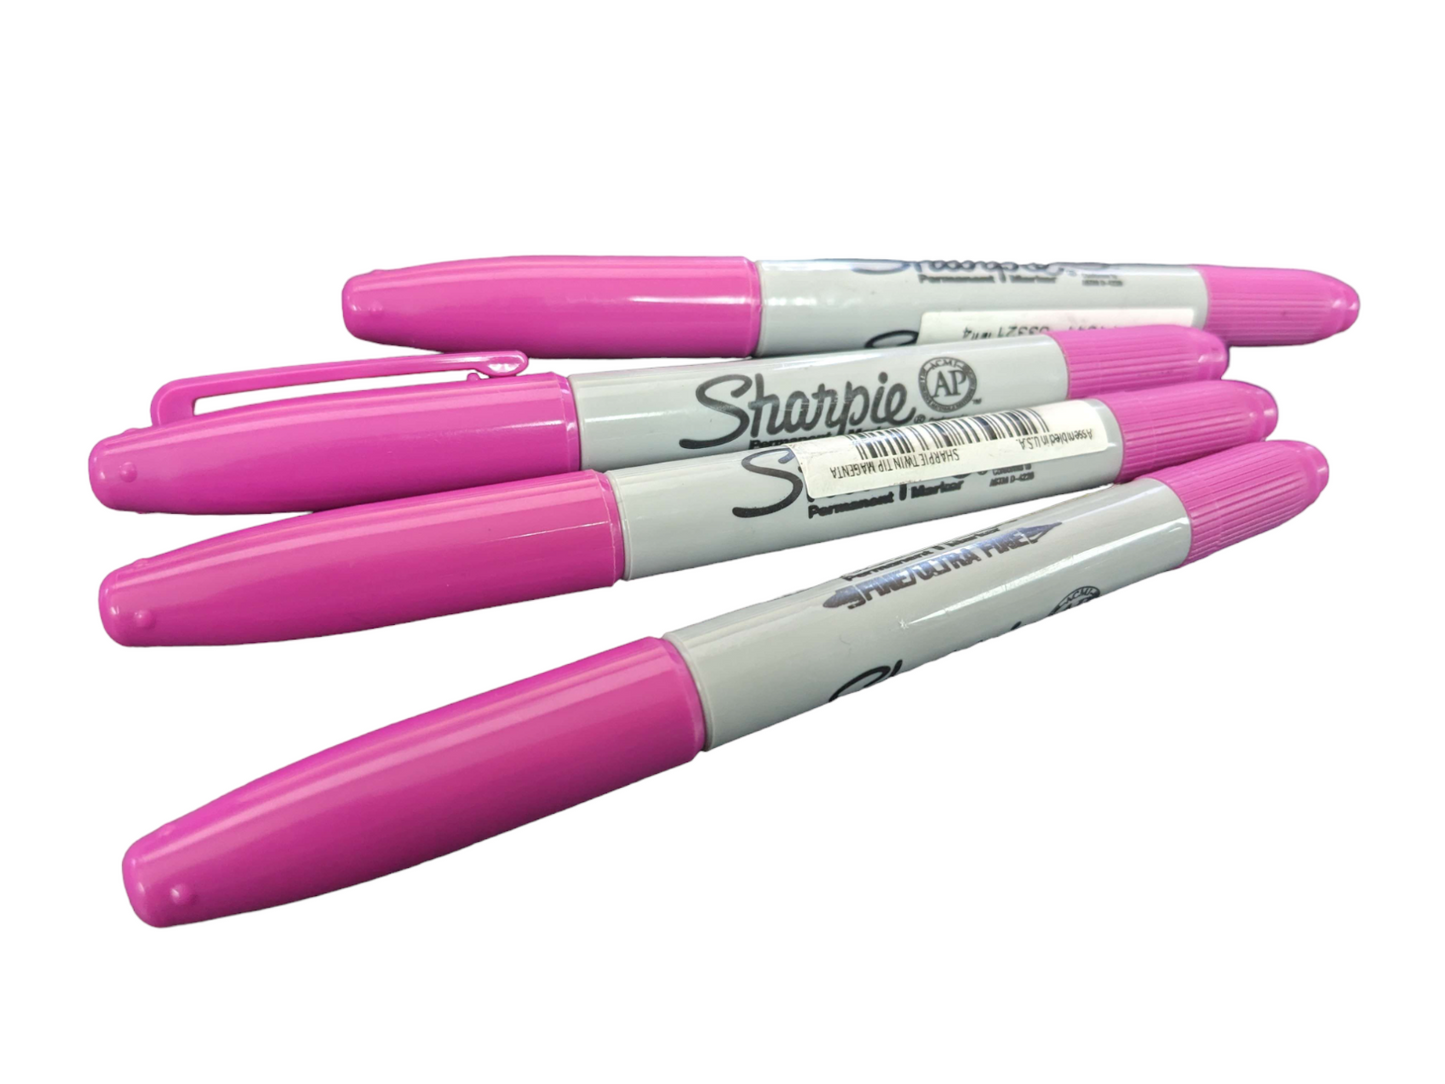 4x Sharpie Twin-Tip Permanent Marker - Magenta - NEW WITH TAGS